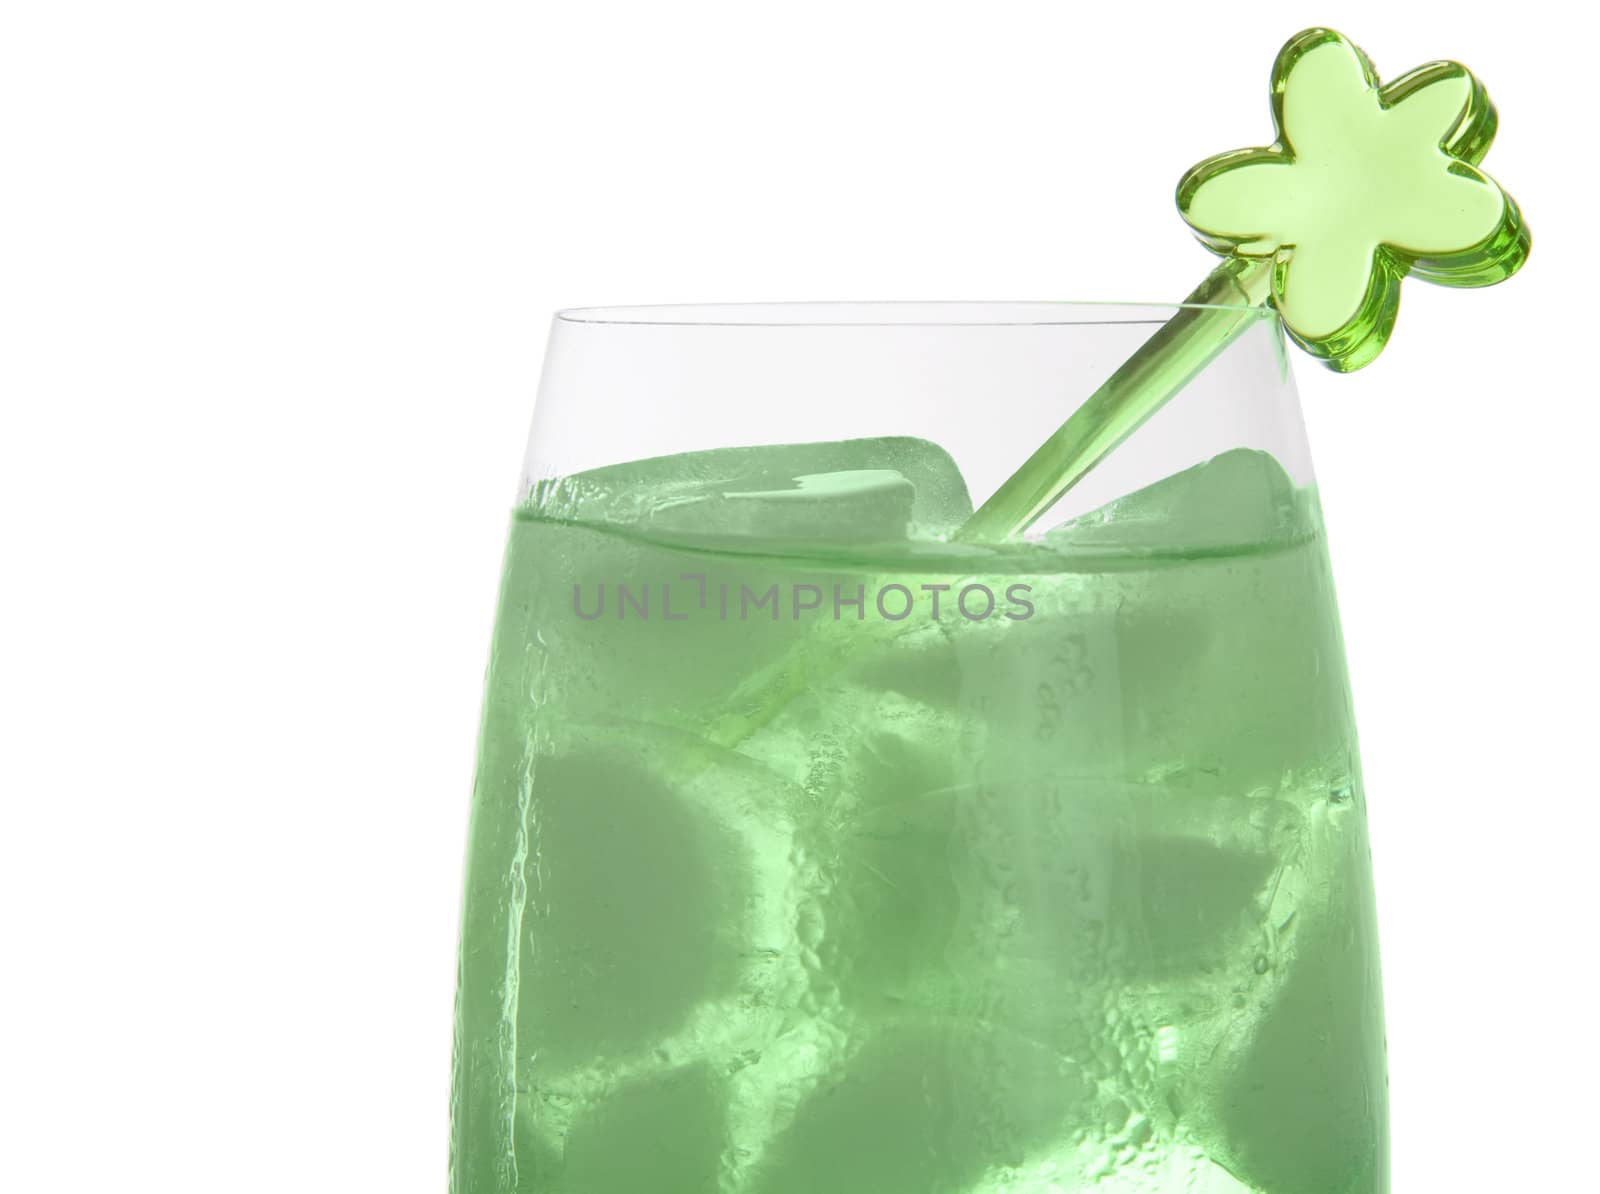 Bright green drink in a tall champagne glass with a green plastic decoration